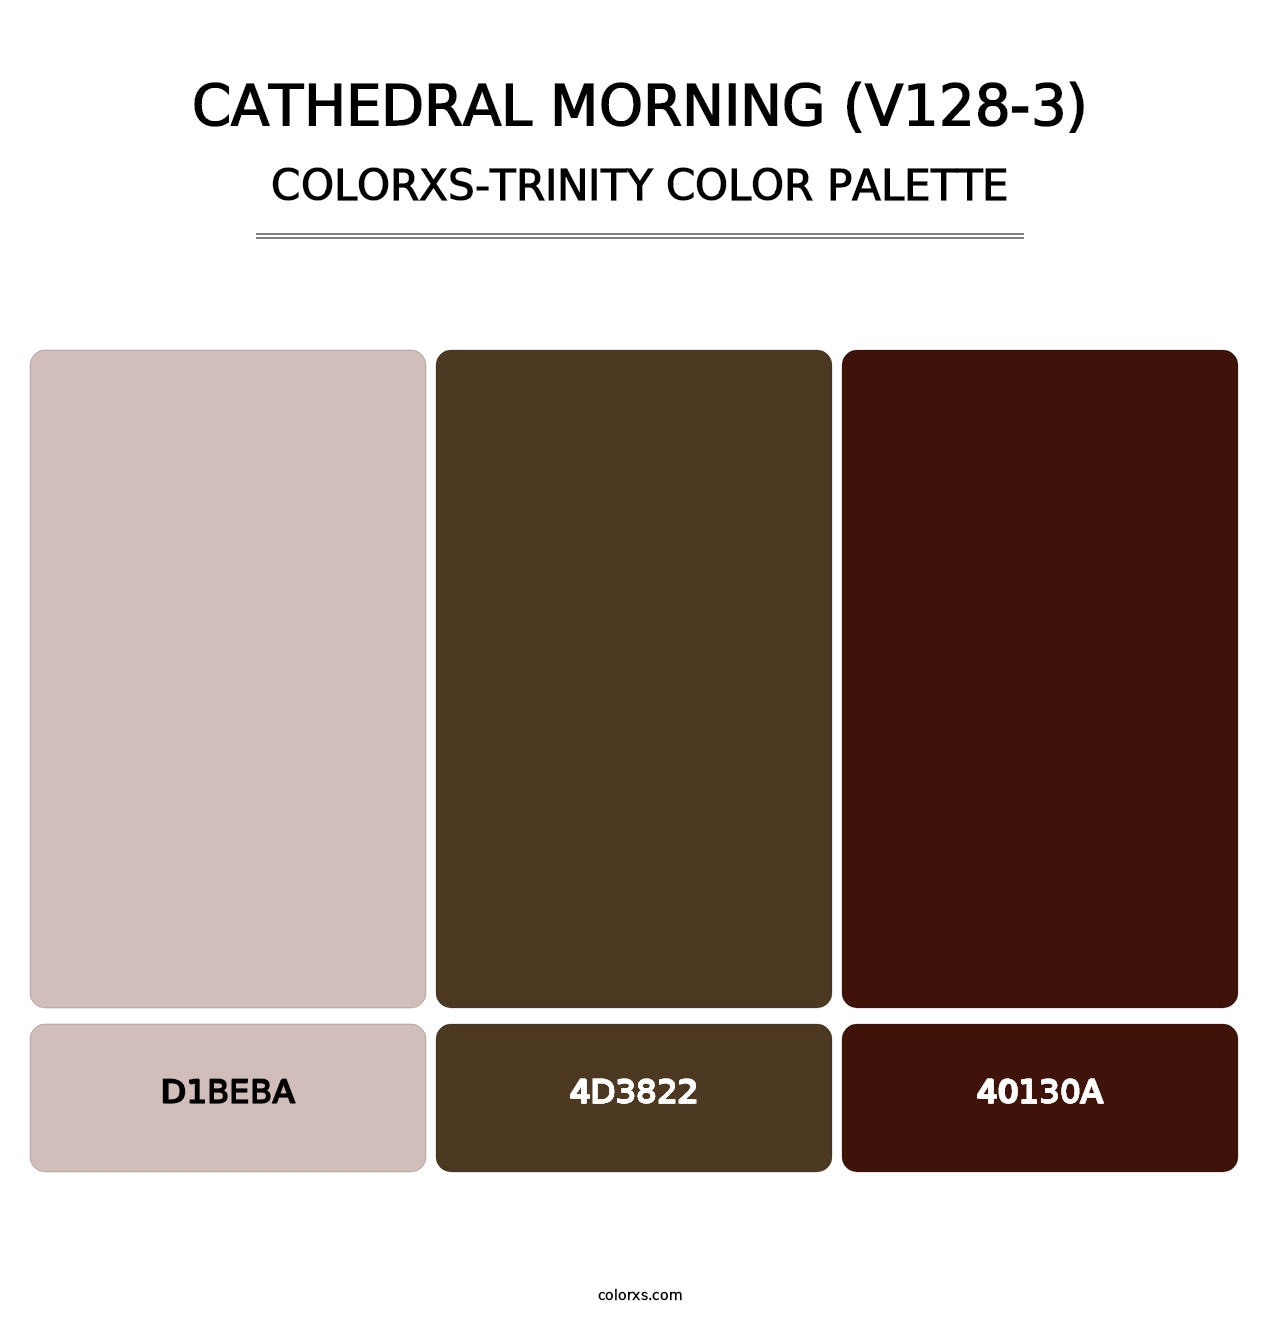 Cathedral Morning (V128-3) - Colorxs Trinity Palette